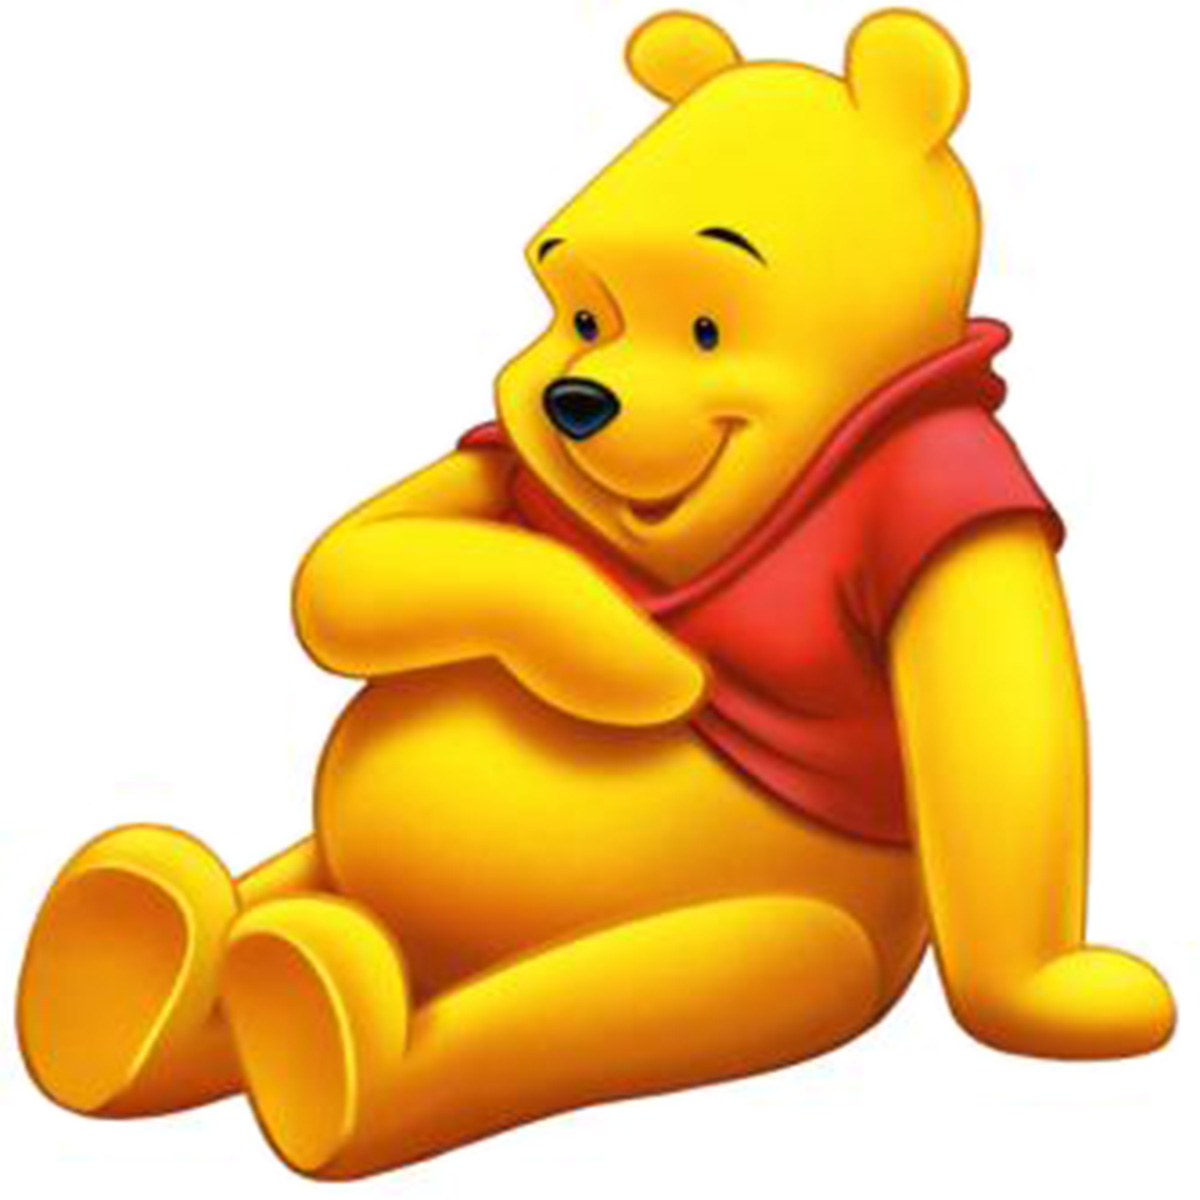 Cartoons Winnie The Pooh Wallpaper   Free high quality background